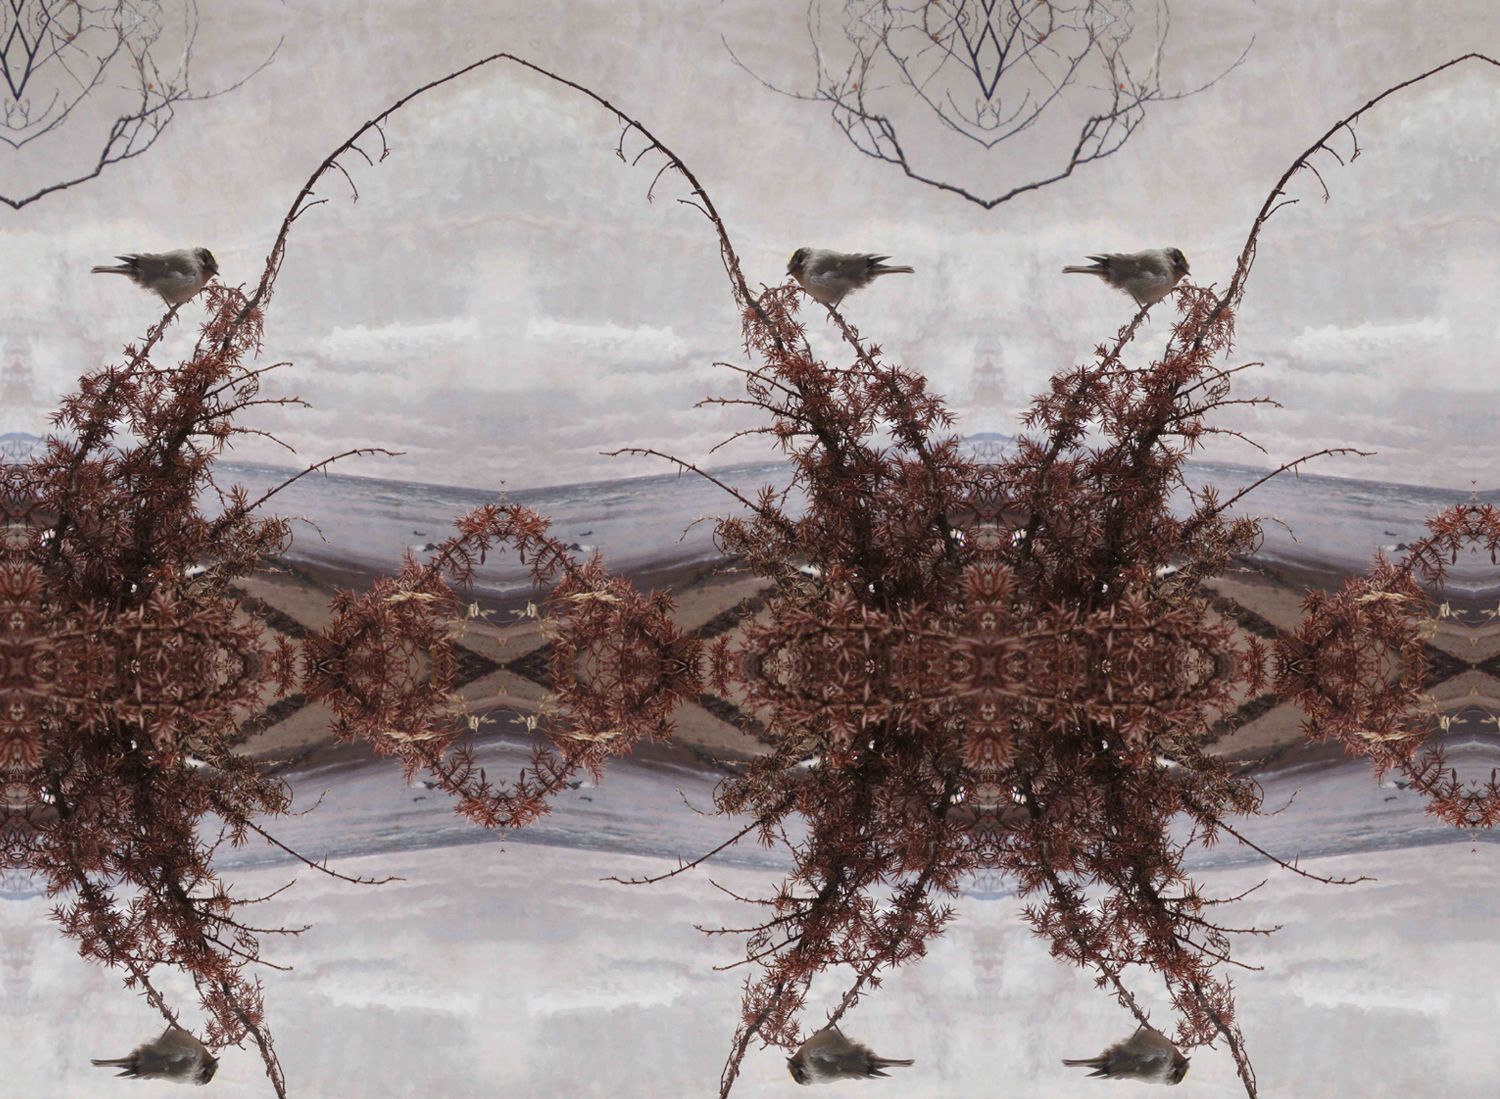  'Untitled' (2009) Digital image, detail from large scale pattern design. 